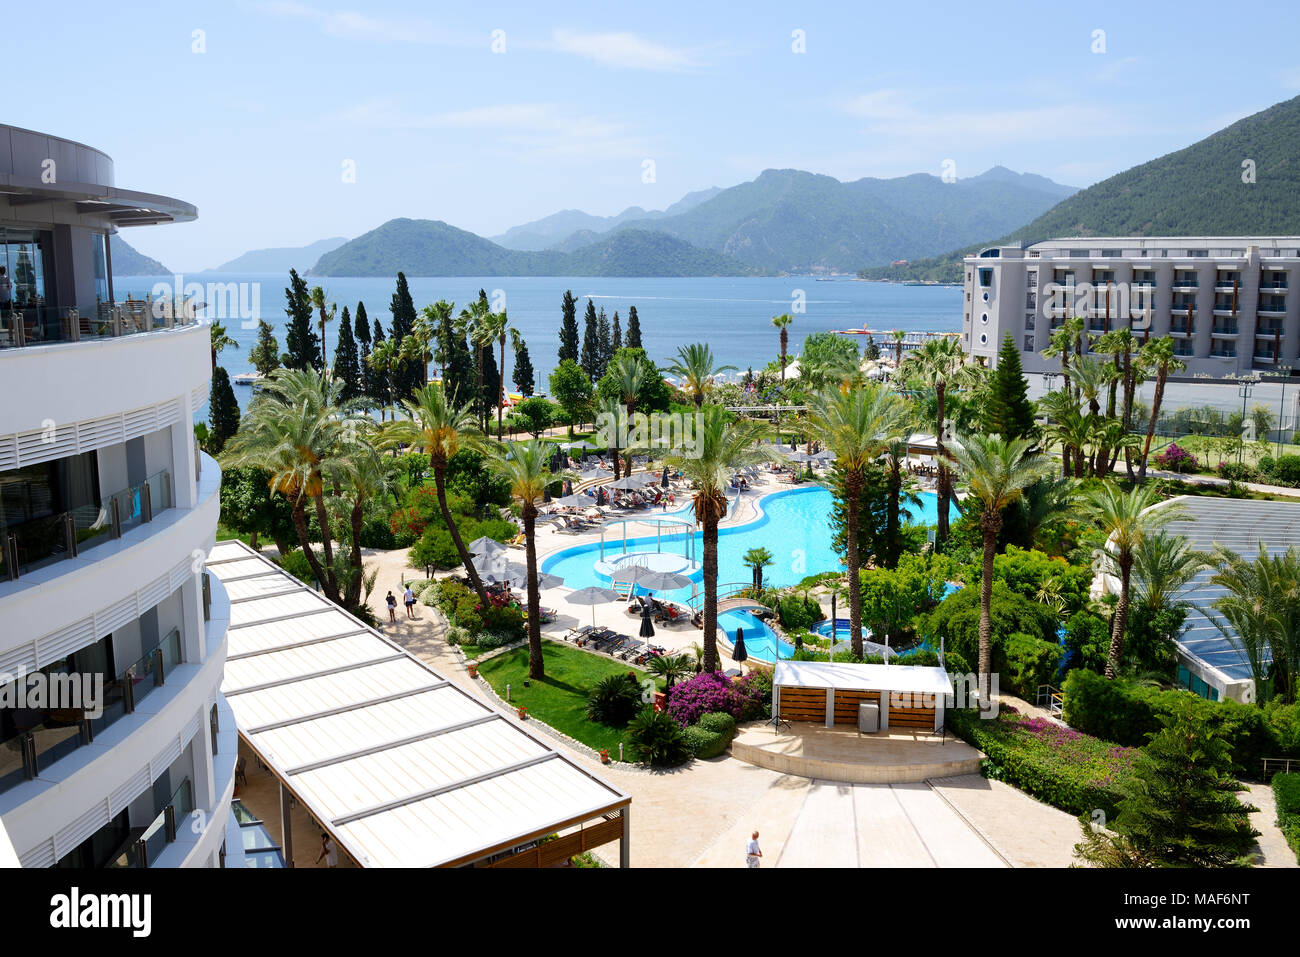 MARMARIS, TURKEY - MAY 20: The tourists enjoing their vacation in luxury hotel on May 20, 2013 in Marmaris, Turkey. More then 36 mln tourists have vis Stock Photo